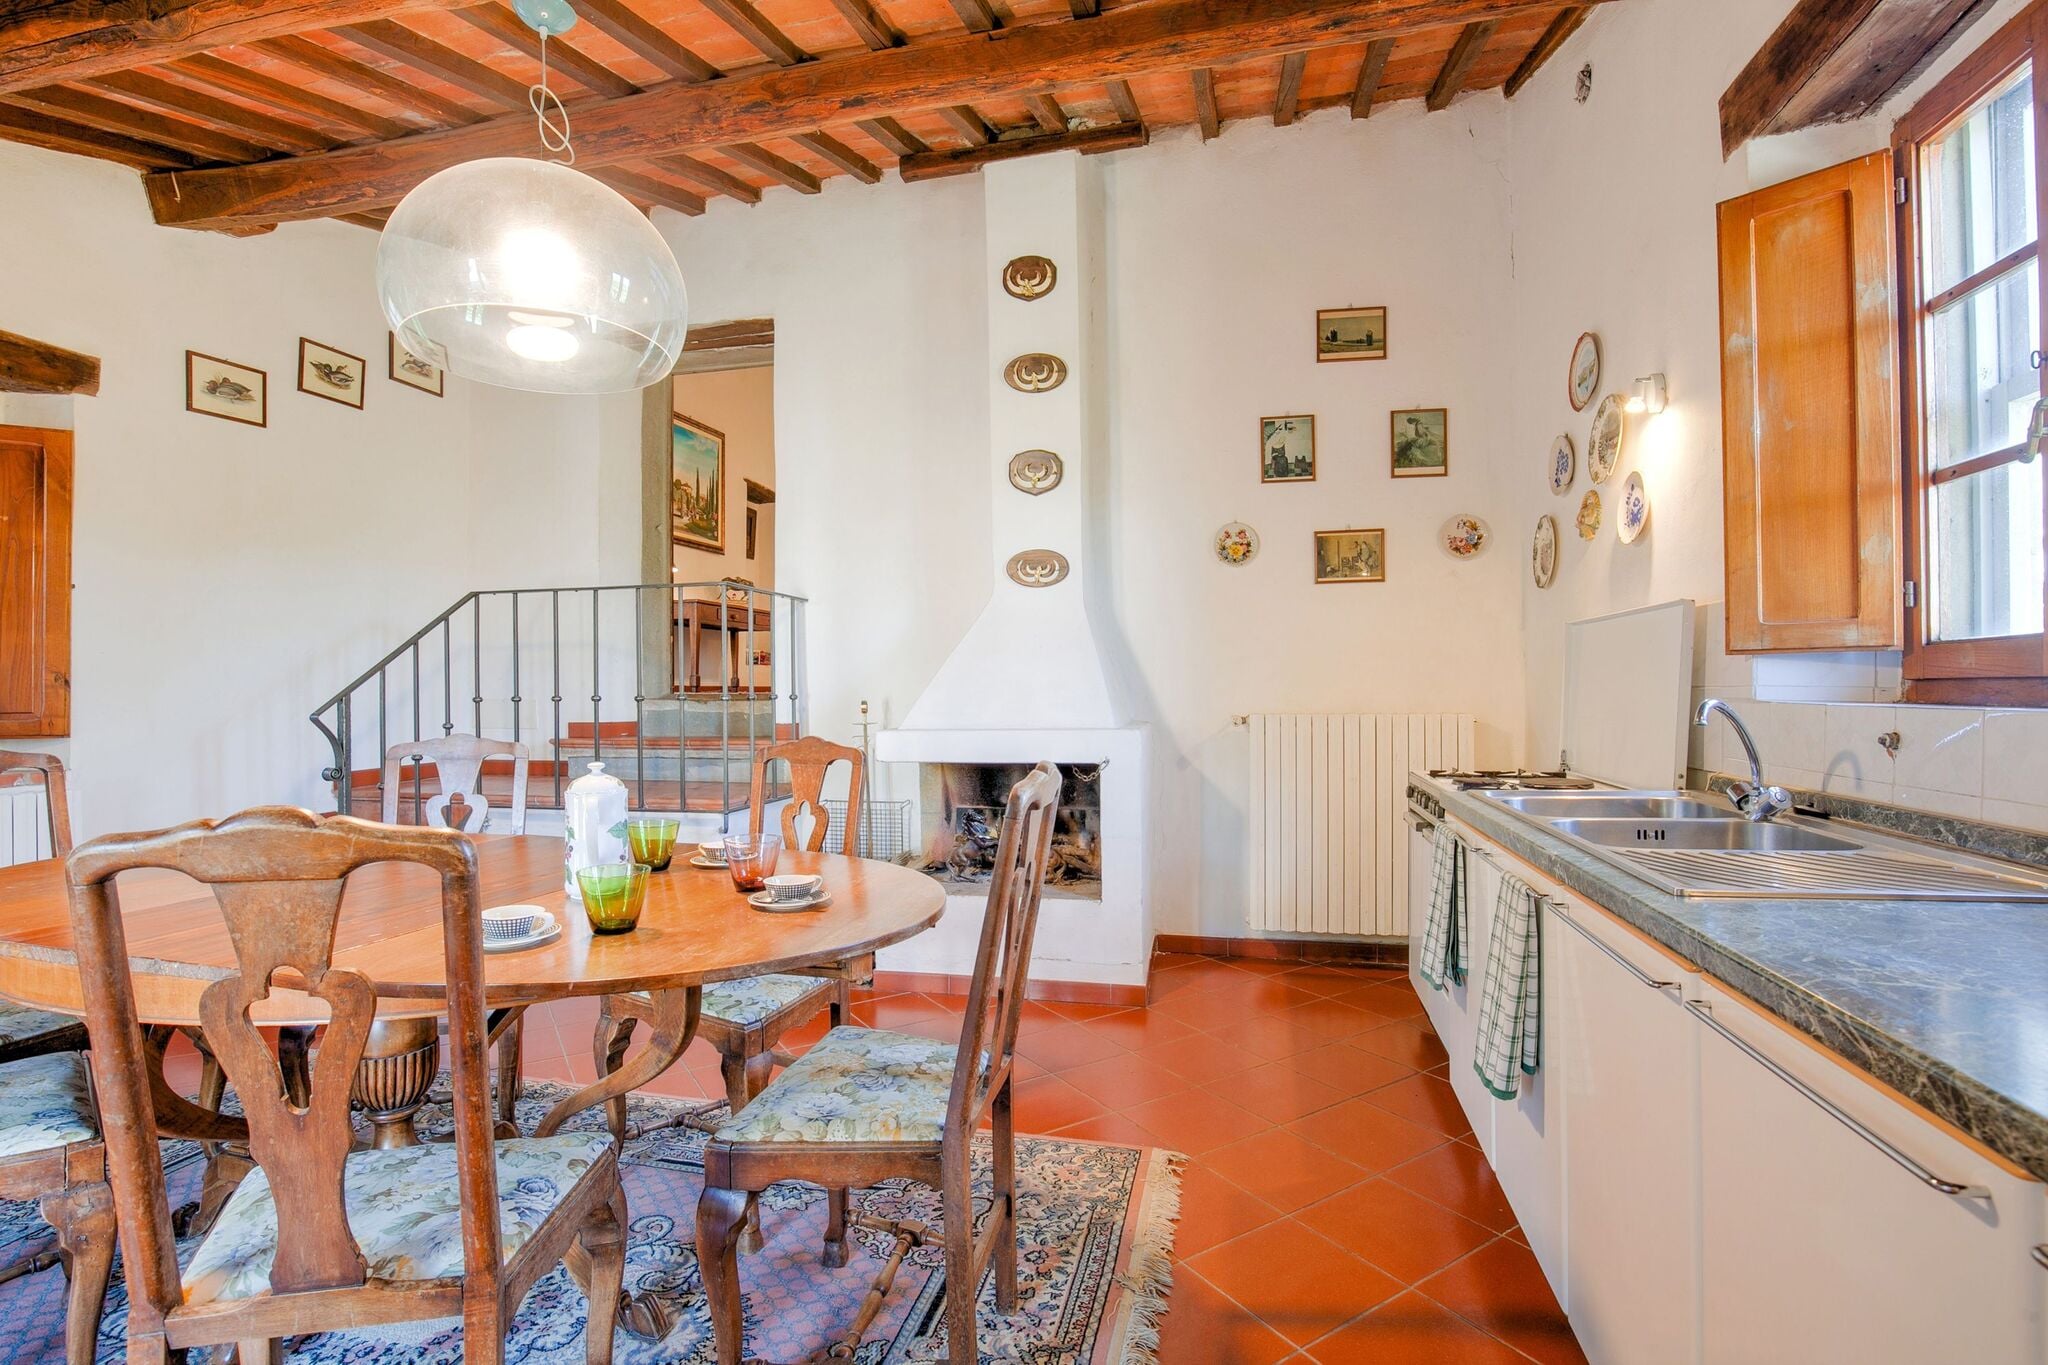 A beautiful, traditional Tuscan hamlet in the hills.